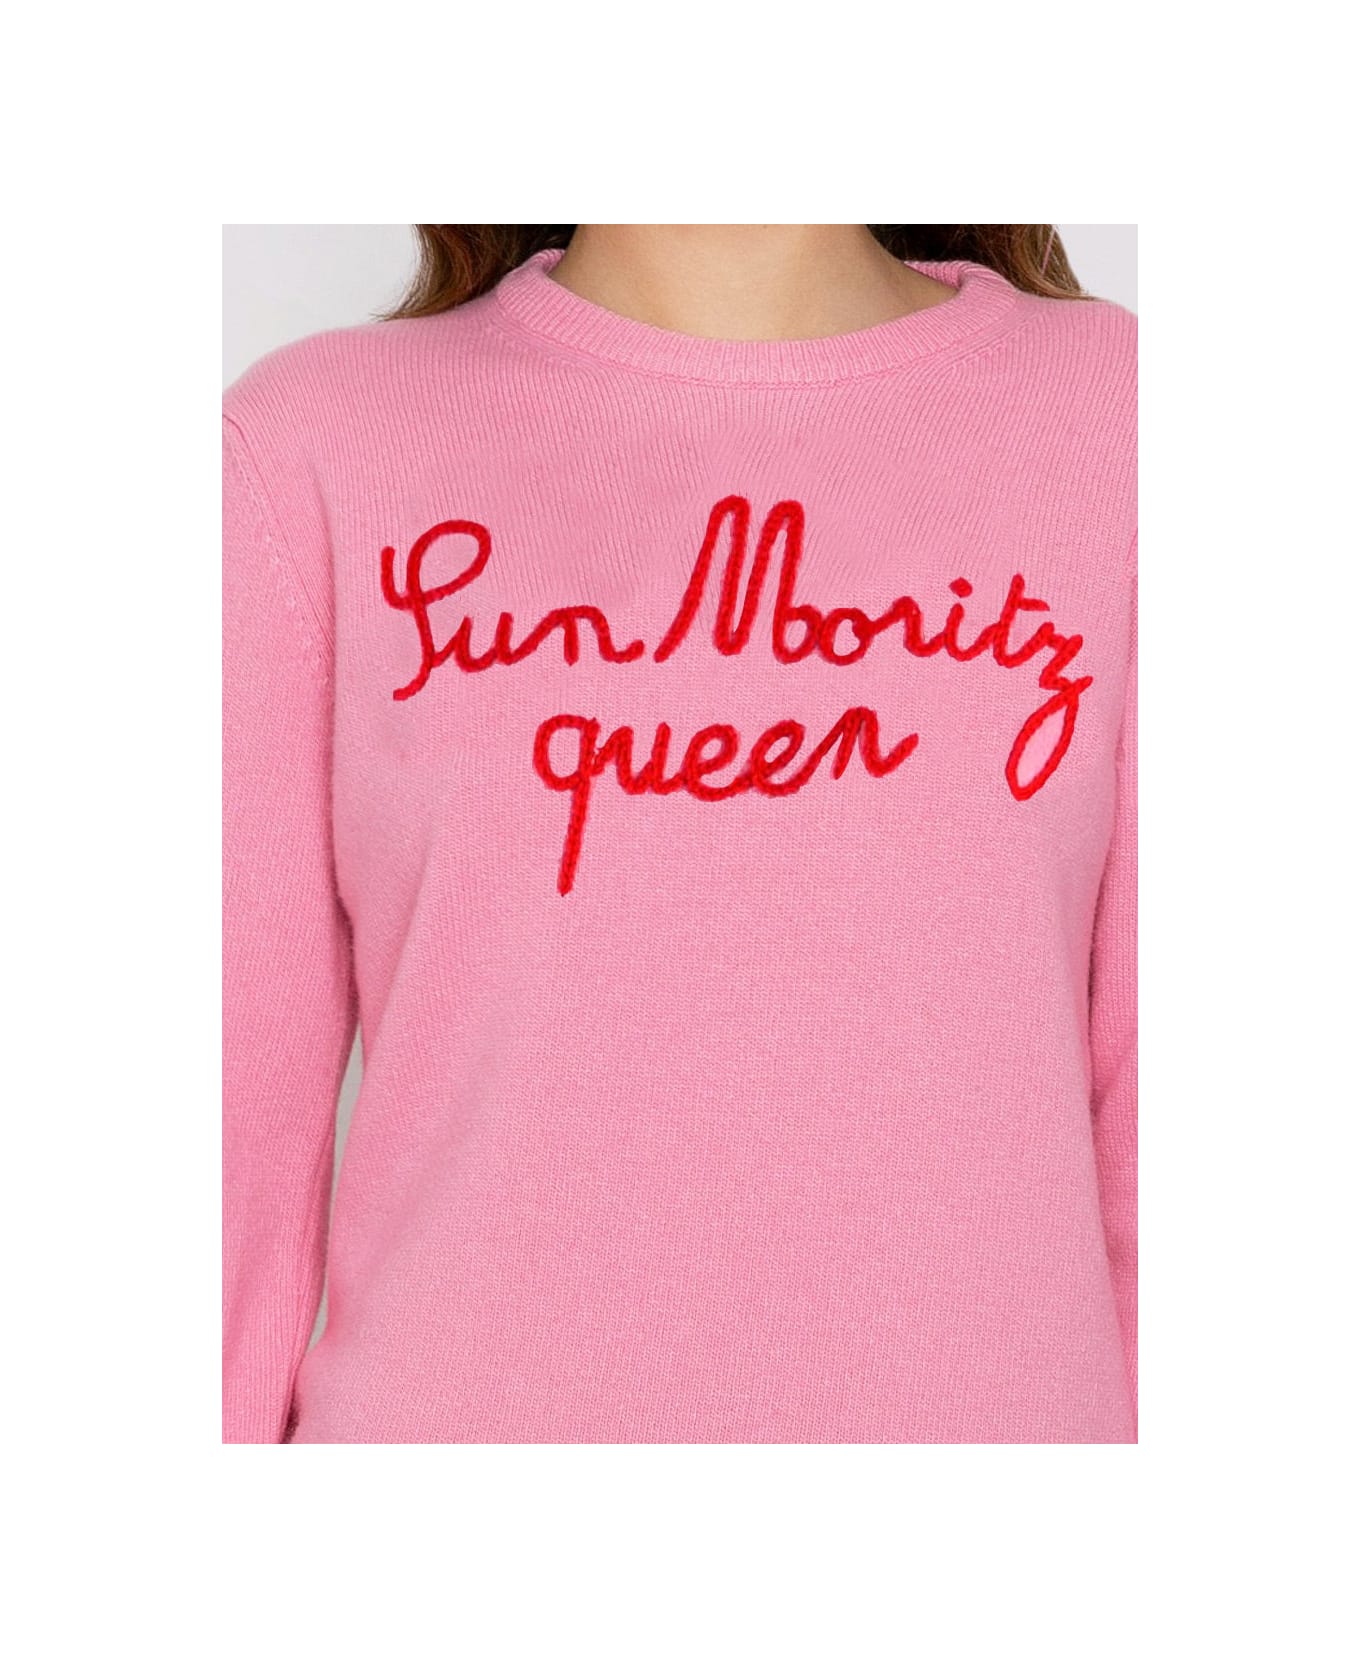 MC2 Saint Barth Woman Sweater With Sun Moritz Queen Embroidery - PINK